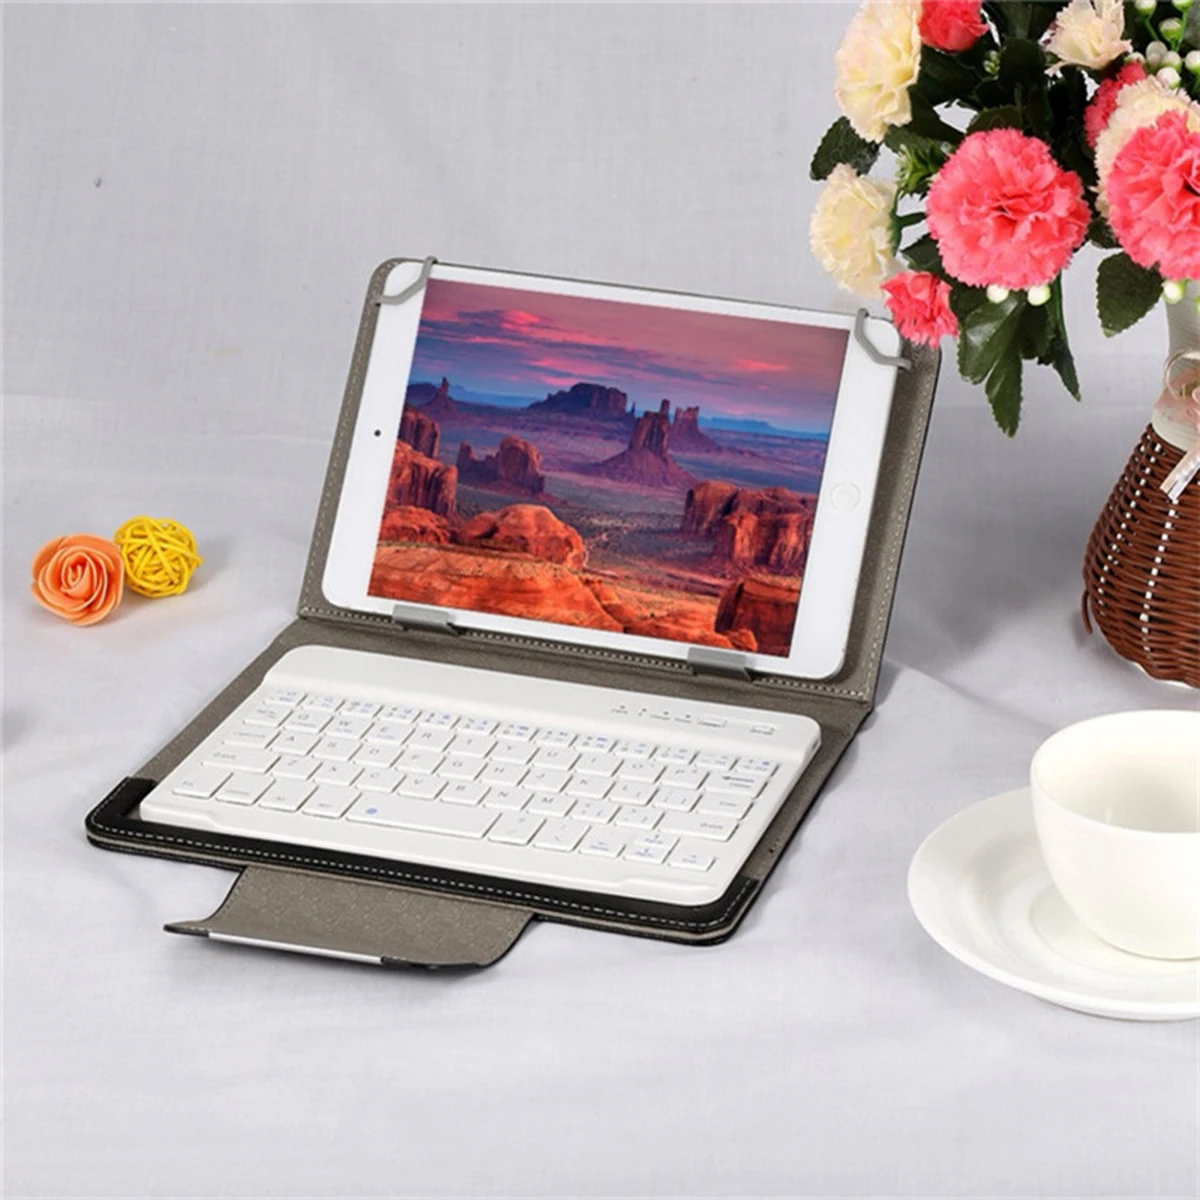 

Universal Wireless BT Keyboard and PU Leather Case Cover for 9.7" - 10.1" Tablets Computer Peripherals